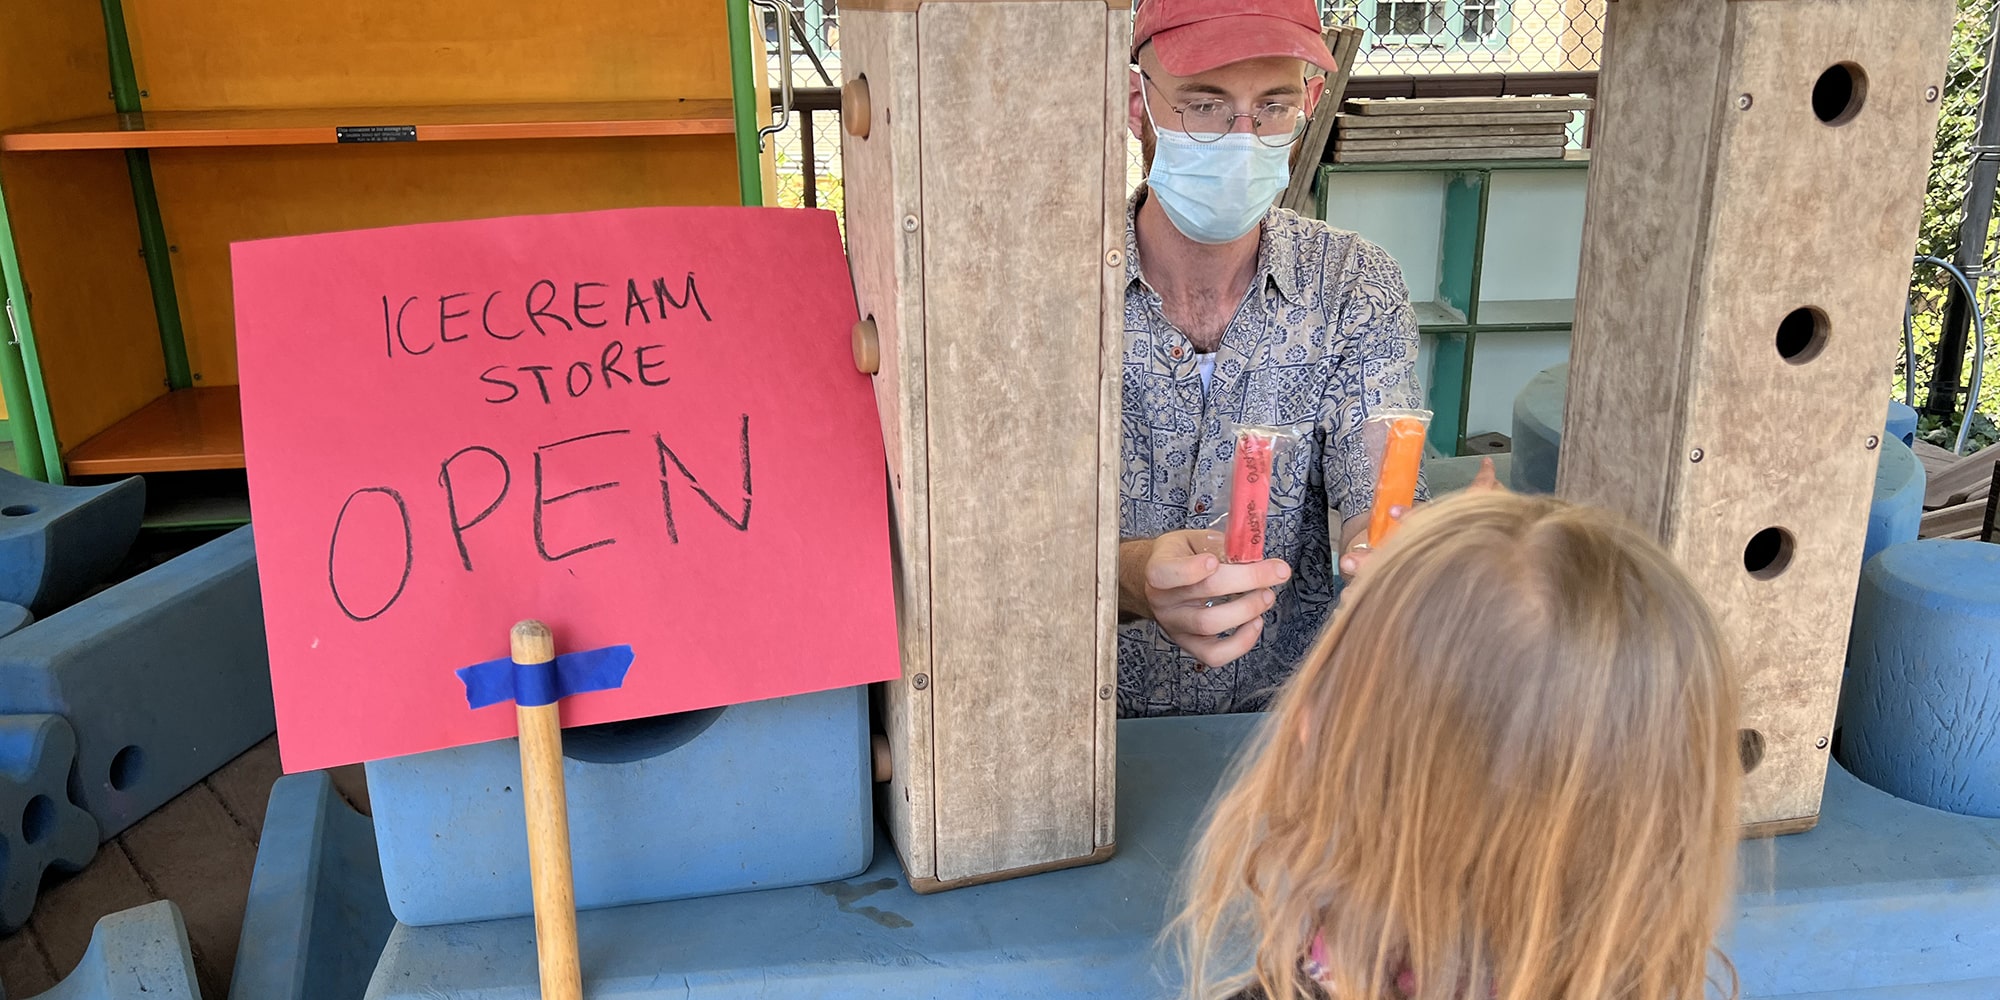 David Allen plays ice cream store with a student